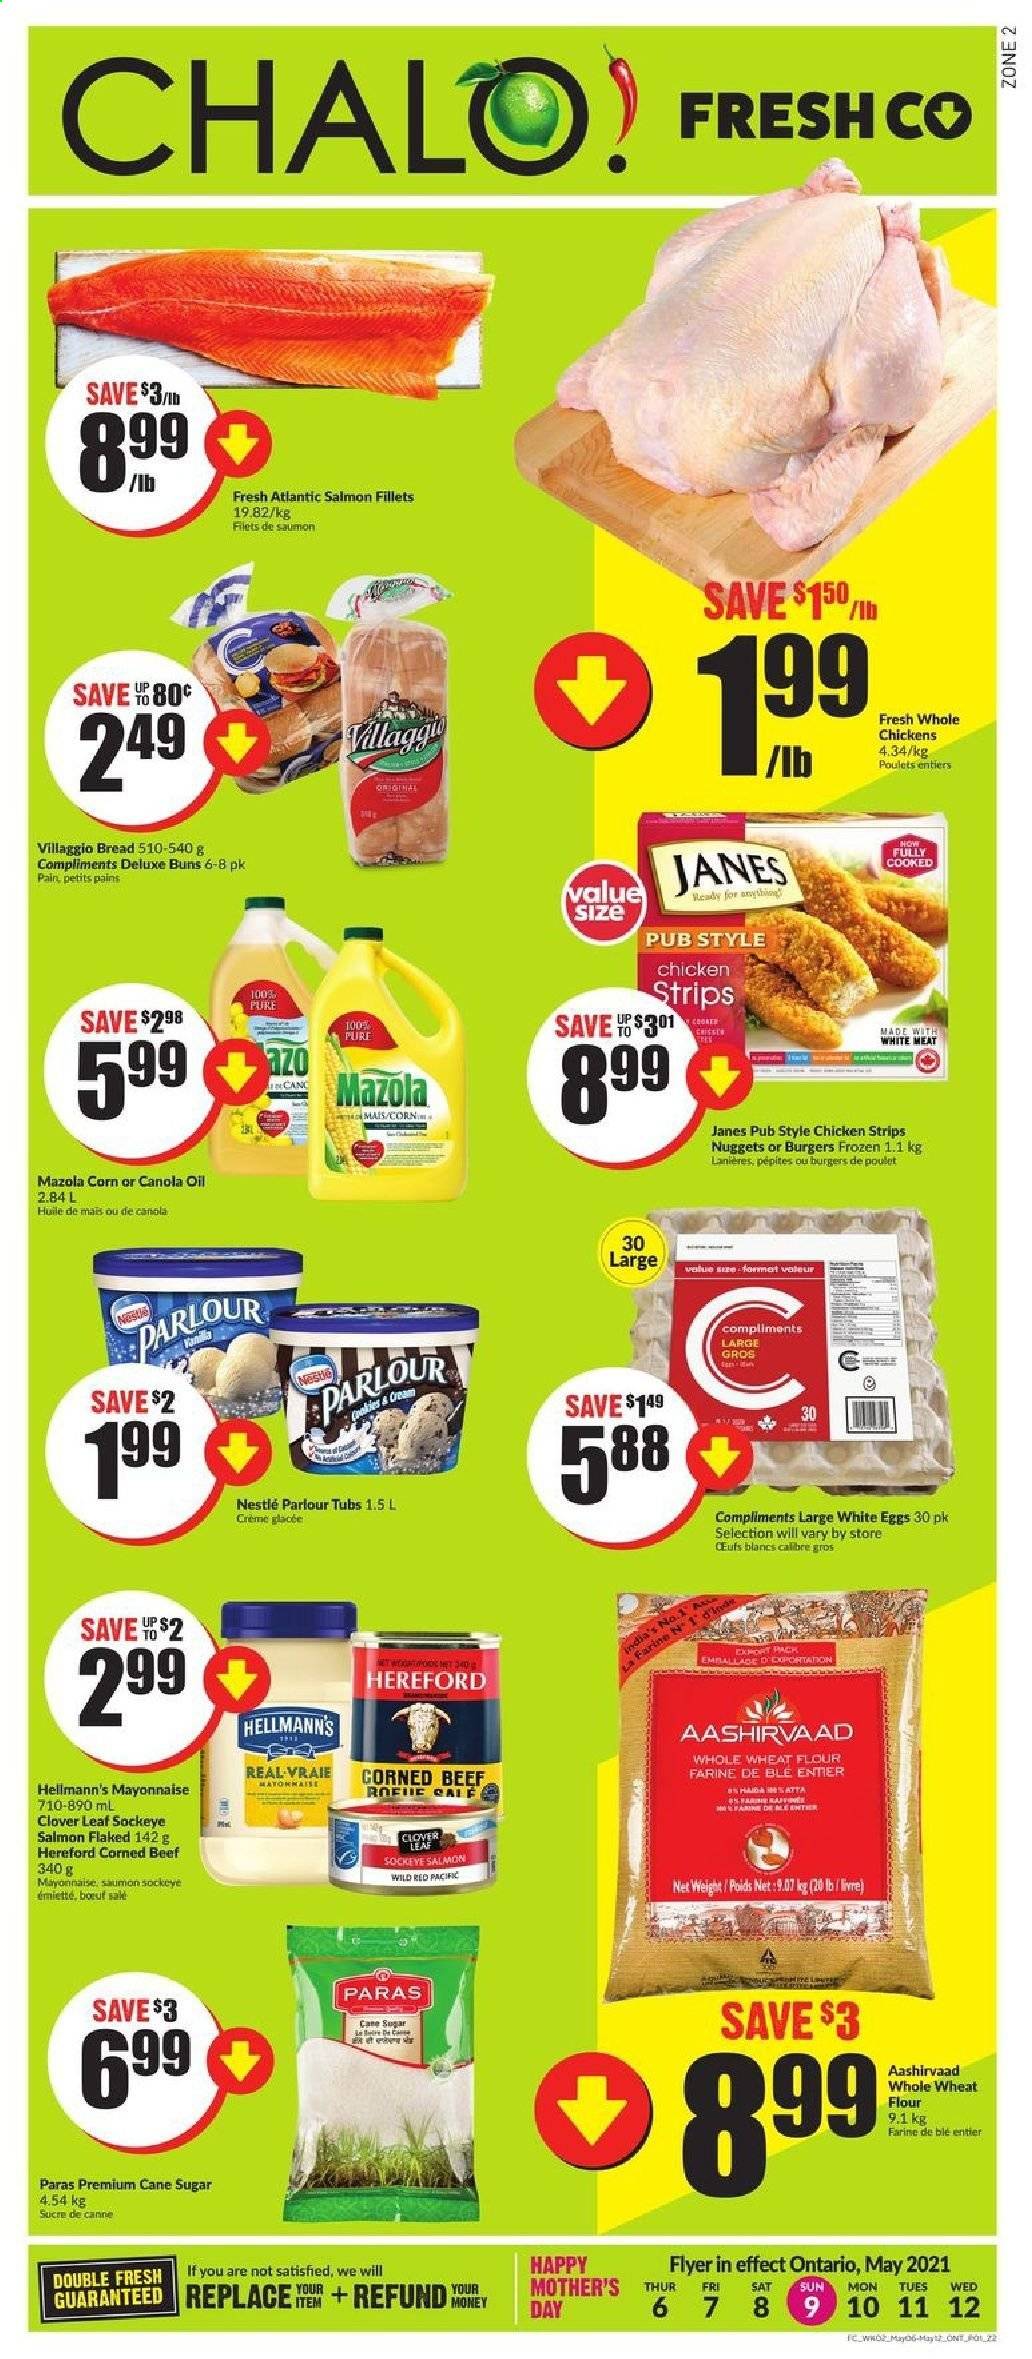 thumbnail - Chalo! FreshCo. Flyer - May 06, 2021 - May 12, 2021 - Sales products - bread, buns, salmon, salmon fillet, nuggets, corned beef, Clover, eggs, Hellmann’s, strips, chicken strips, cane sugar, flour, sugar, wheat flour, whole wheat flour, Aashirvaad, canola oil, oil, honey, whole chicken, beef meat, Nestlé. Page 1.